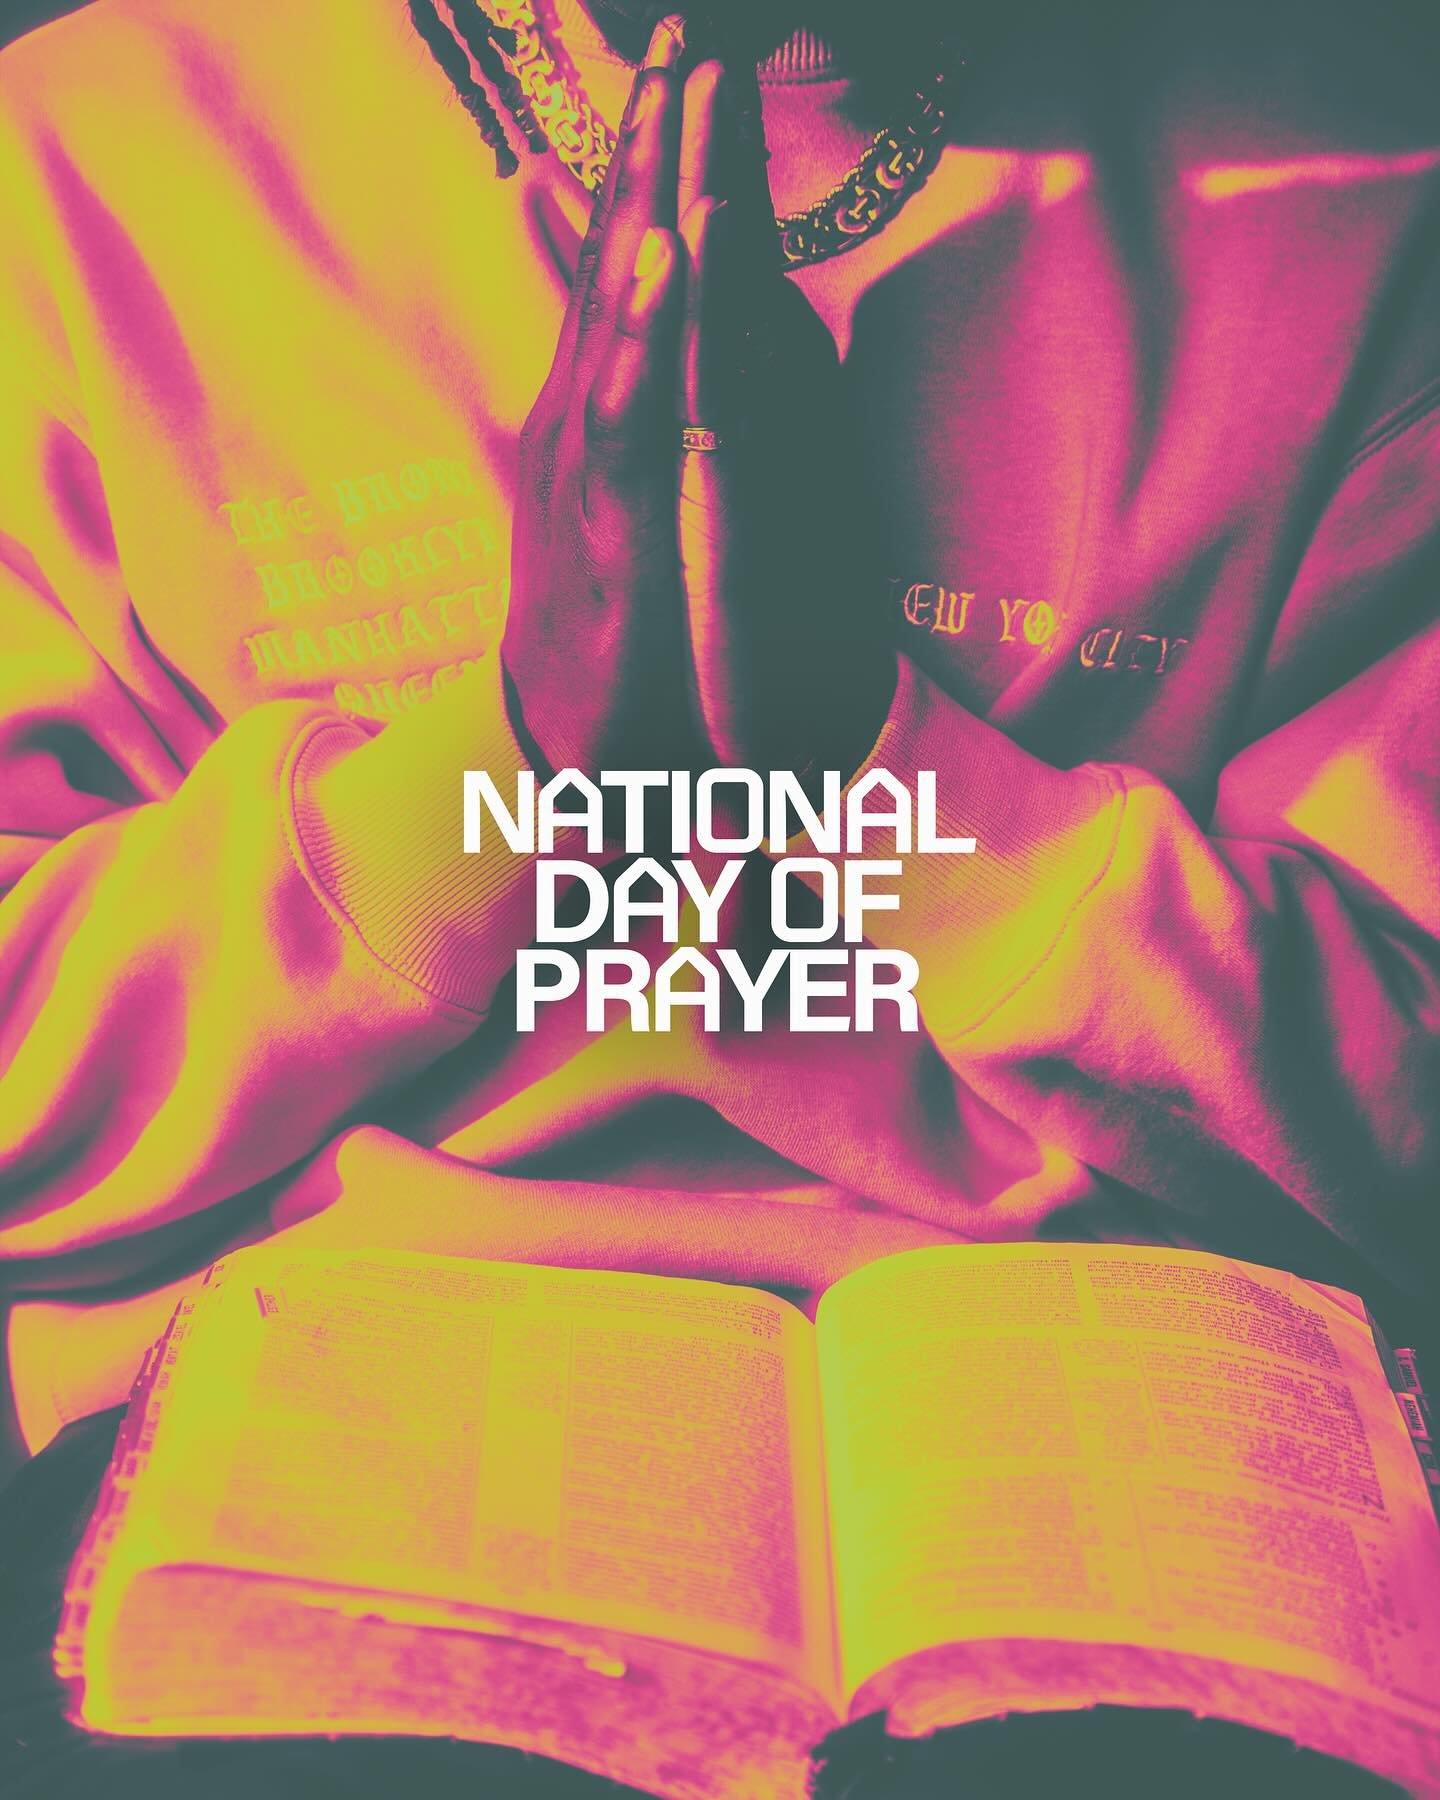 It&rsquo;s National Day of Prayer! 🙏

Take some time today to work through this prayer over our community &amp; our country with us.

There is power in prayer!!
#NationalDayofPrayer #IAmFreedomChurch